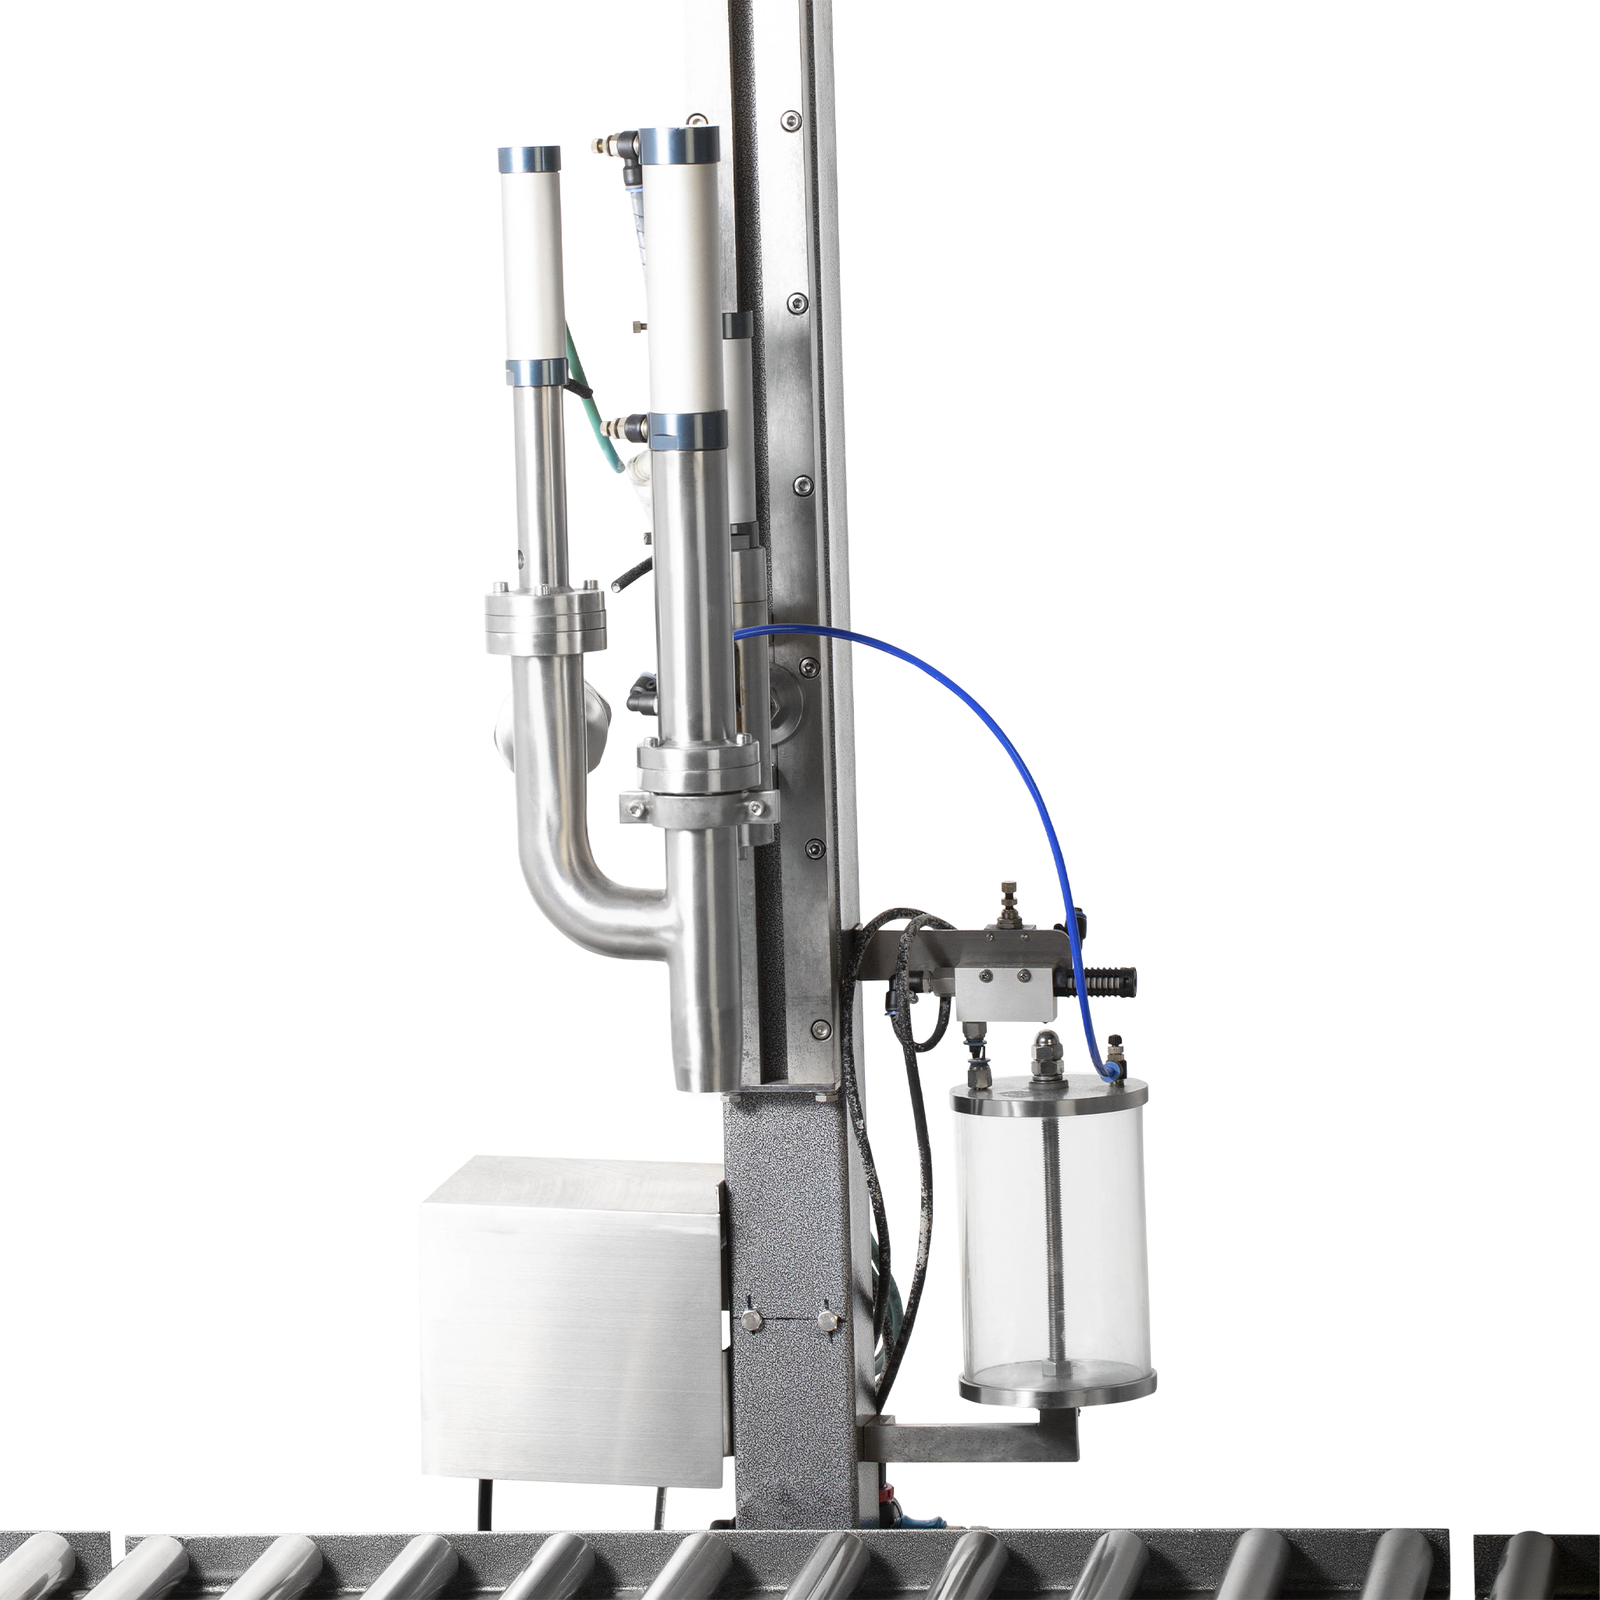 Closeup of the liquid net weight filler nozzle and the height adjustable tower.